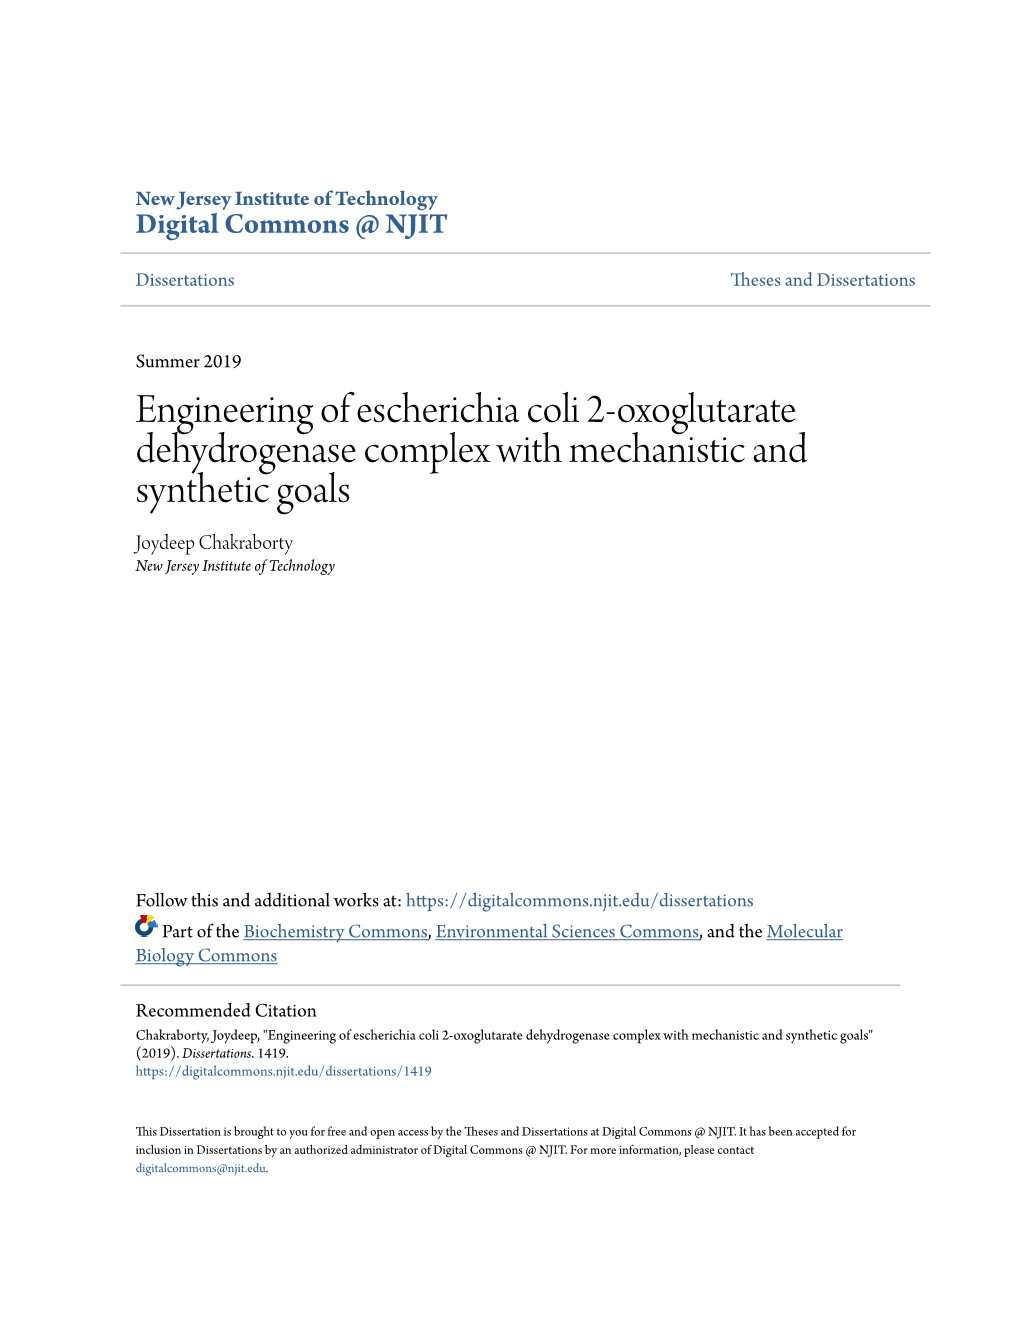 Engineering of Escherichia Coli 2-Oxoglutarate Dehydrogenase Complex with Mechanistic and Synthetic Goals Joydeep Chakraborty New Jersey Institute of Technology